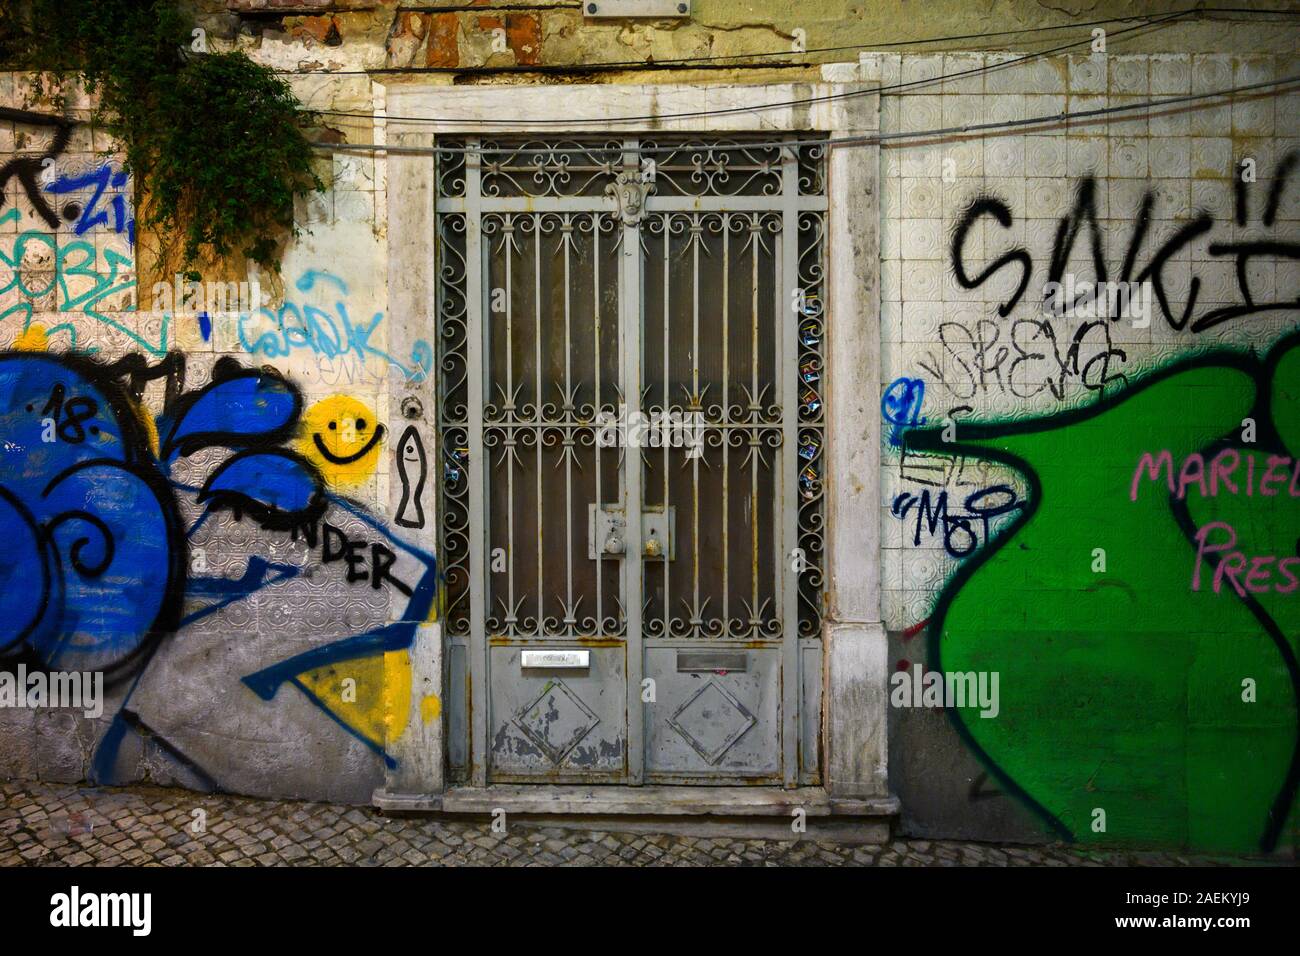 Graffiti on the wall of typical house in Encarnacao, Lisboa Region, Portugal Stock Photo